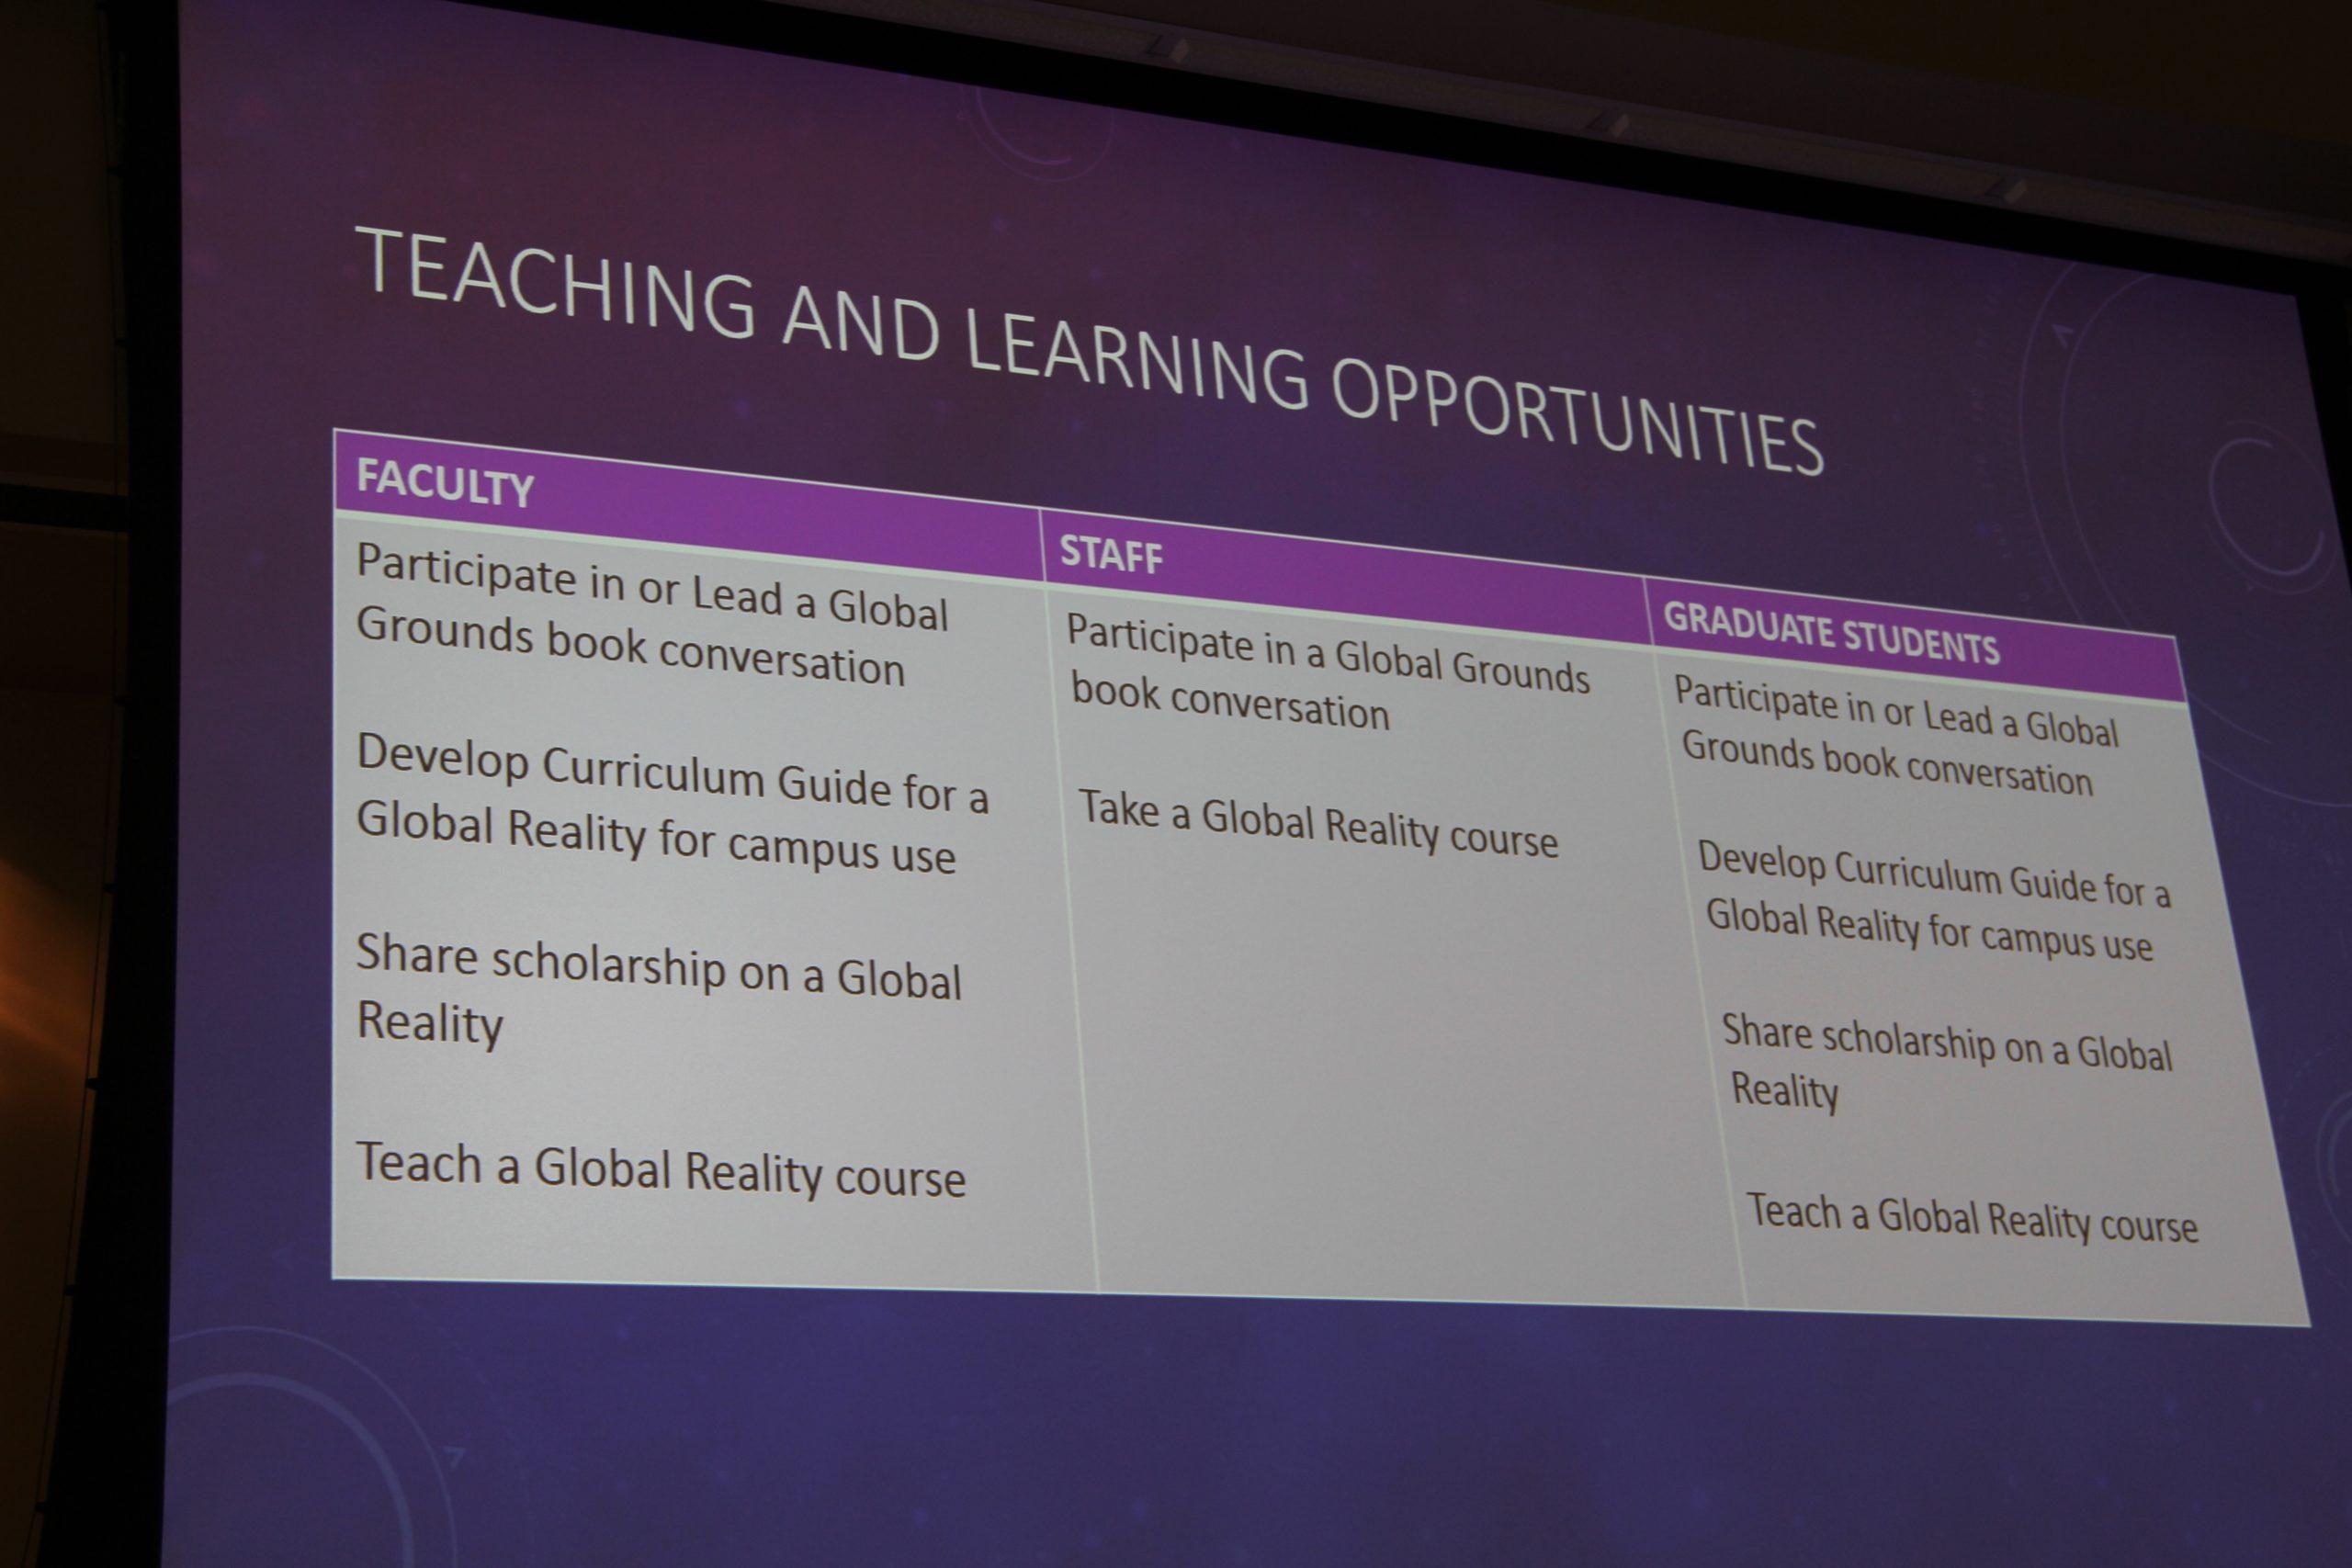 Possible opportunities for faculty, staff and graduate students. 